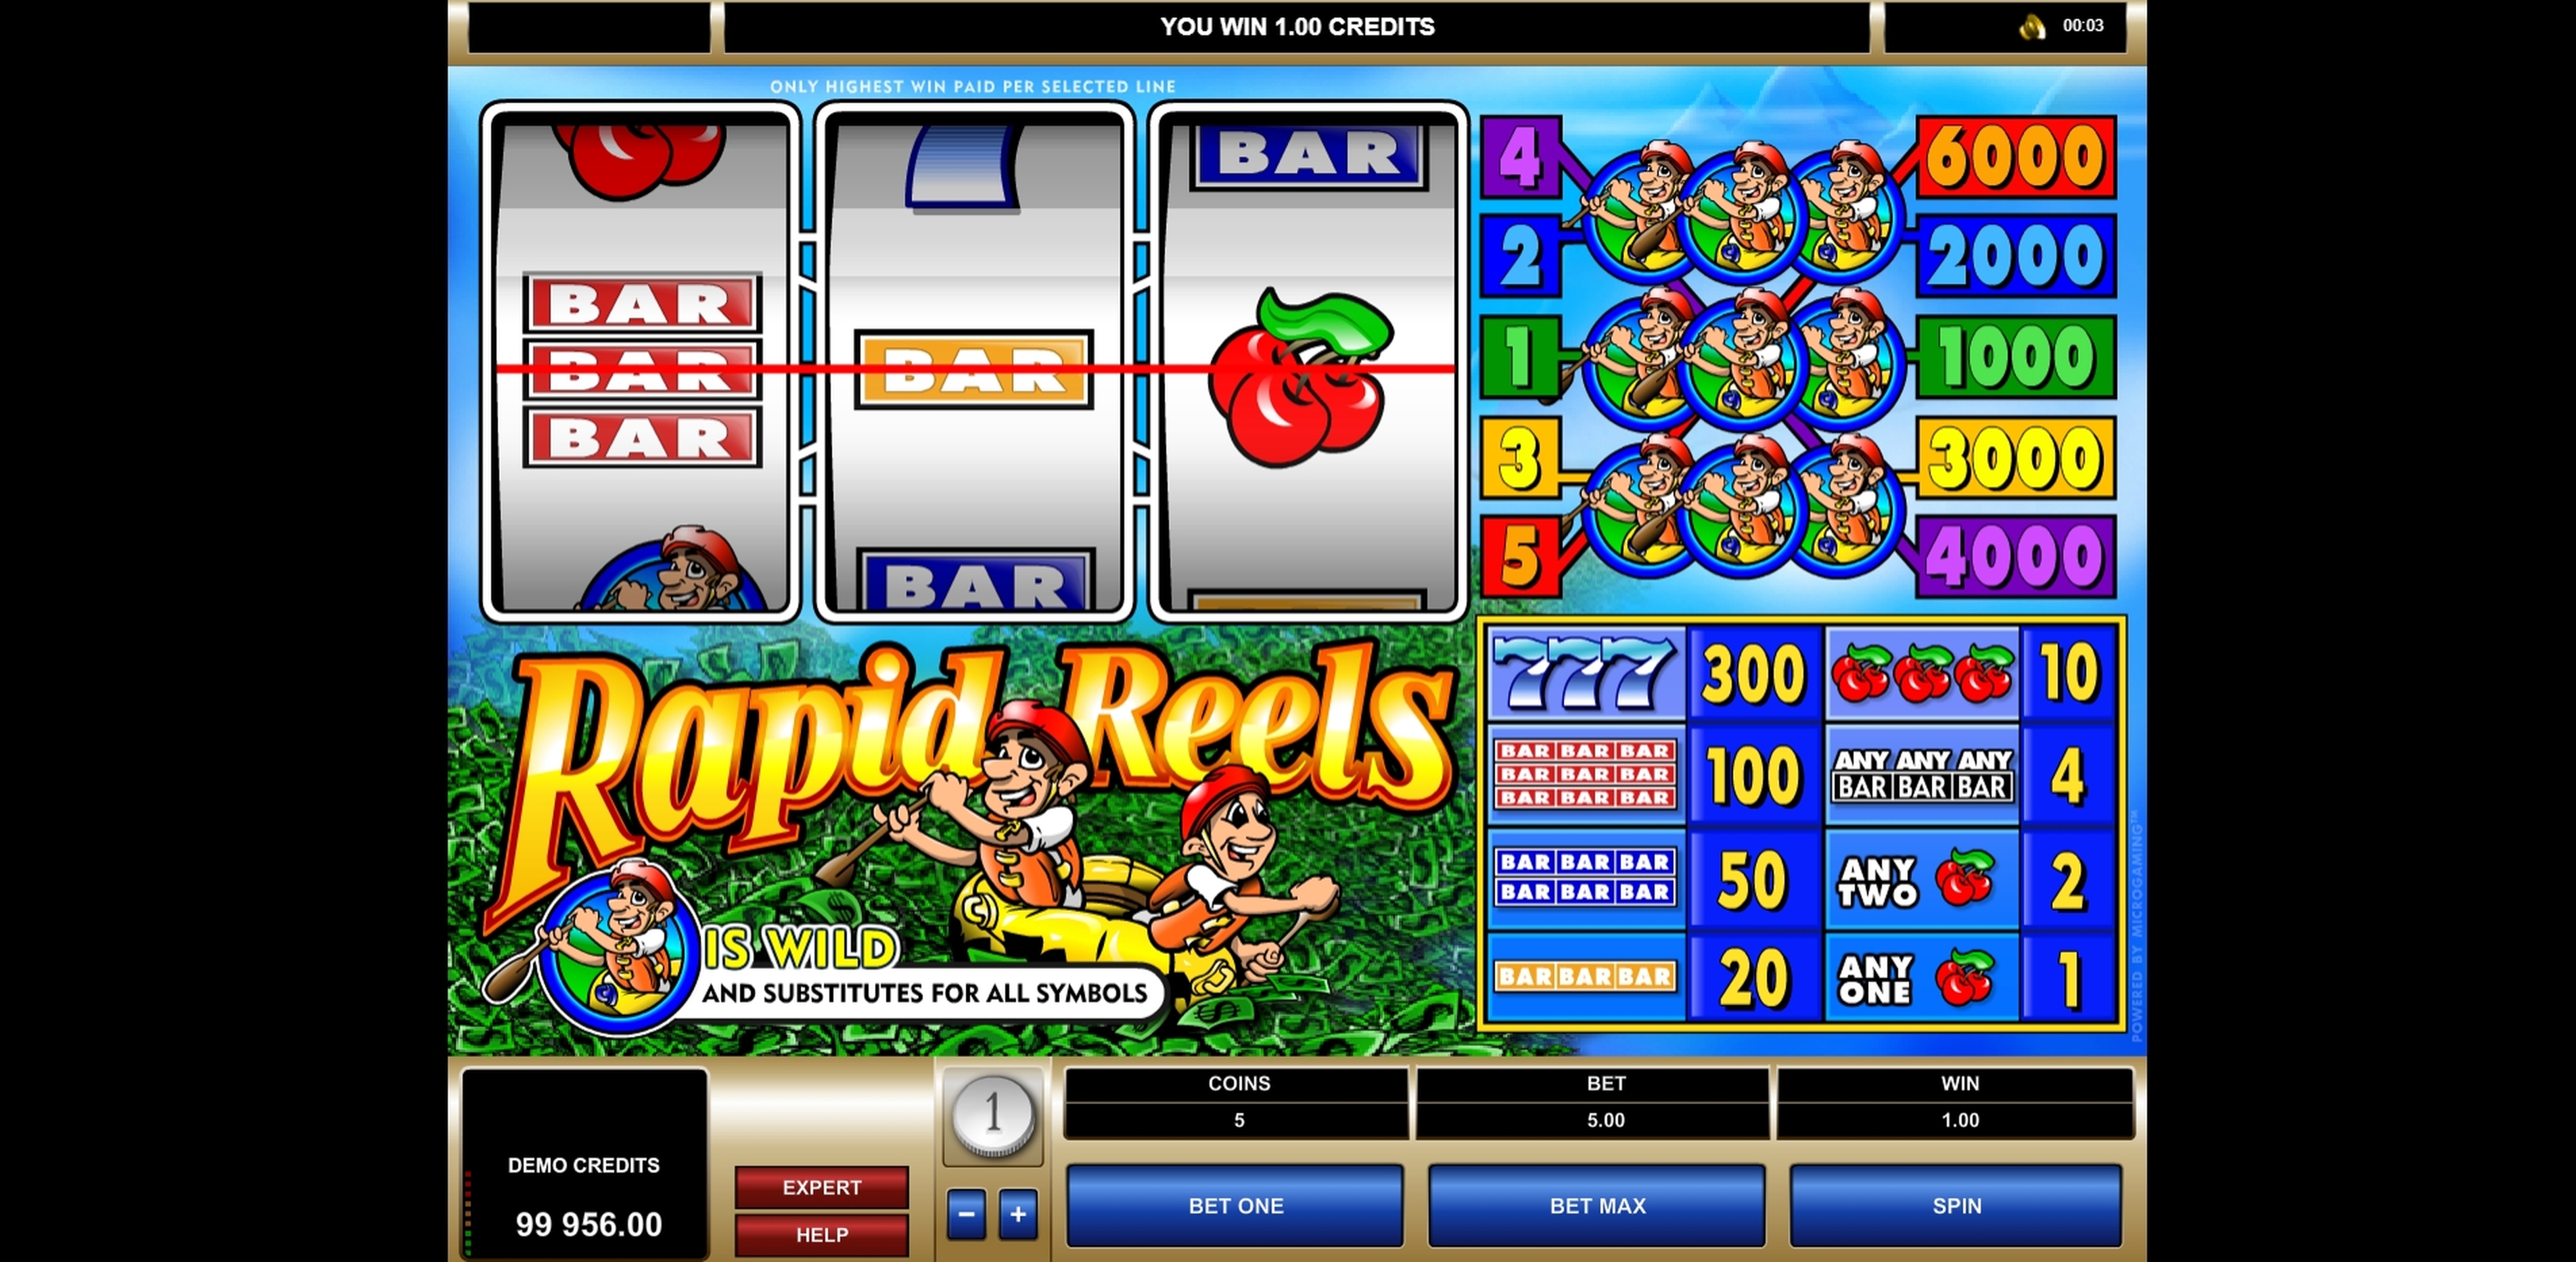 Win Money in Rapid Reels Free Slot Game by Microgaming